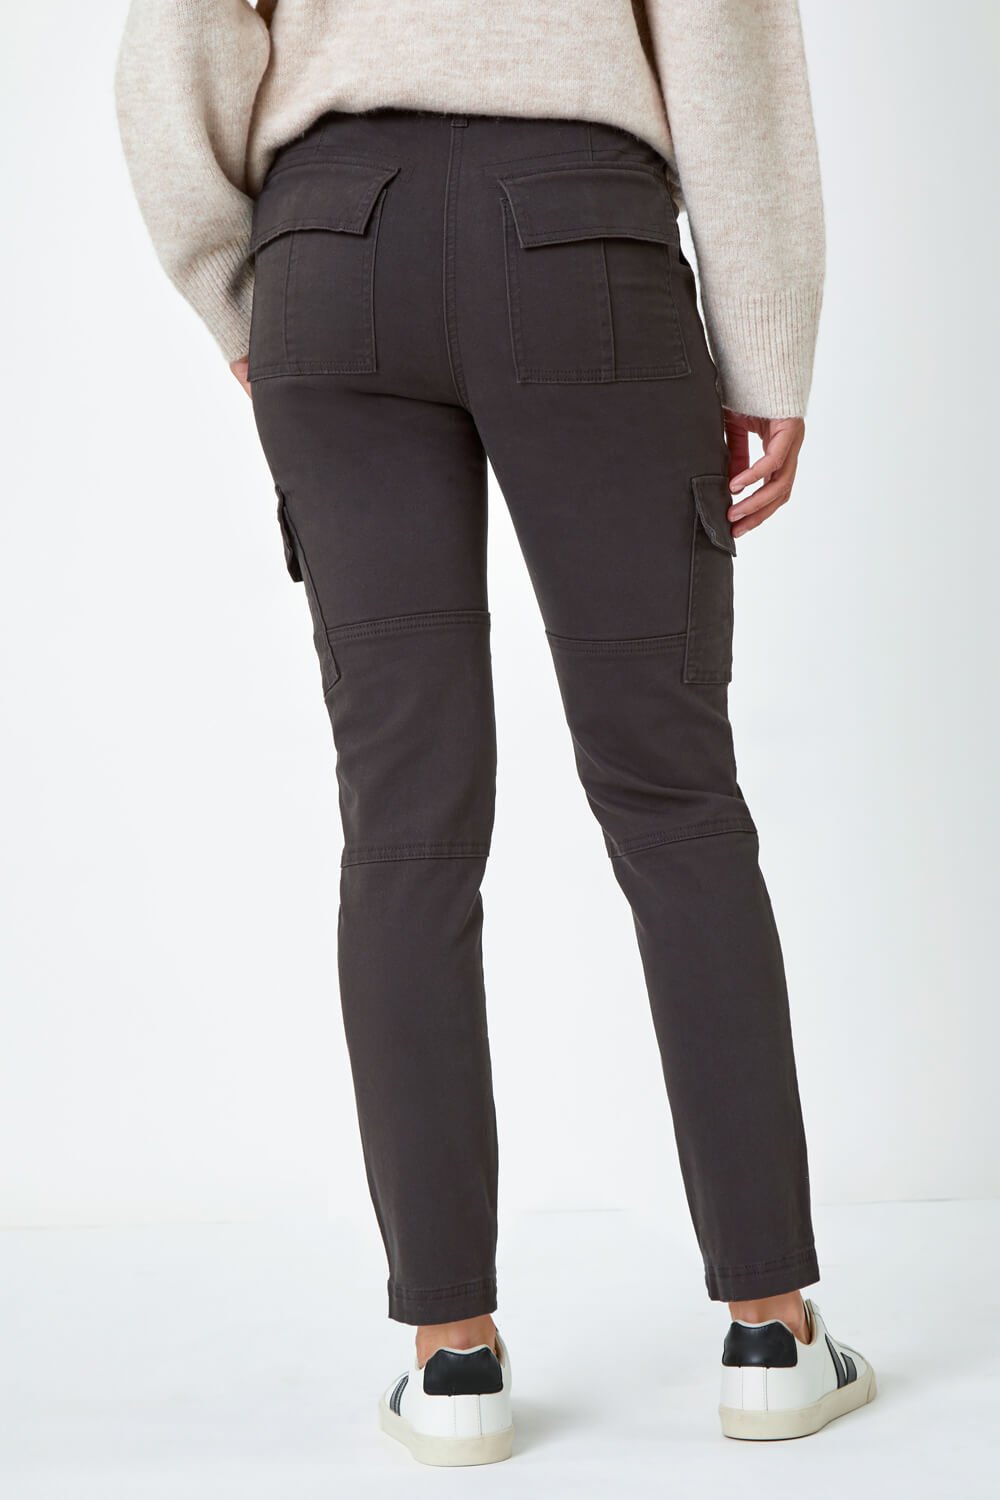 Charcoal Cotton Blend Cargo Stretch Jegging, Image 3 of 5